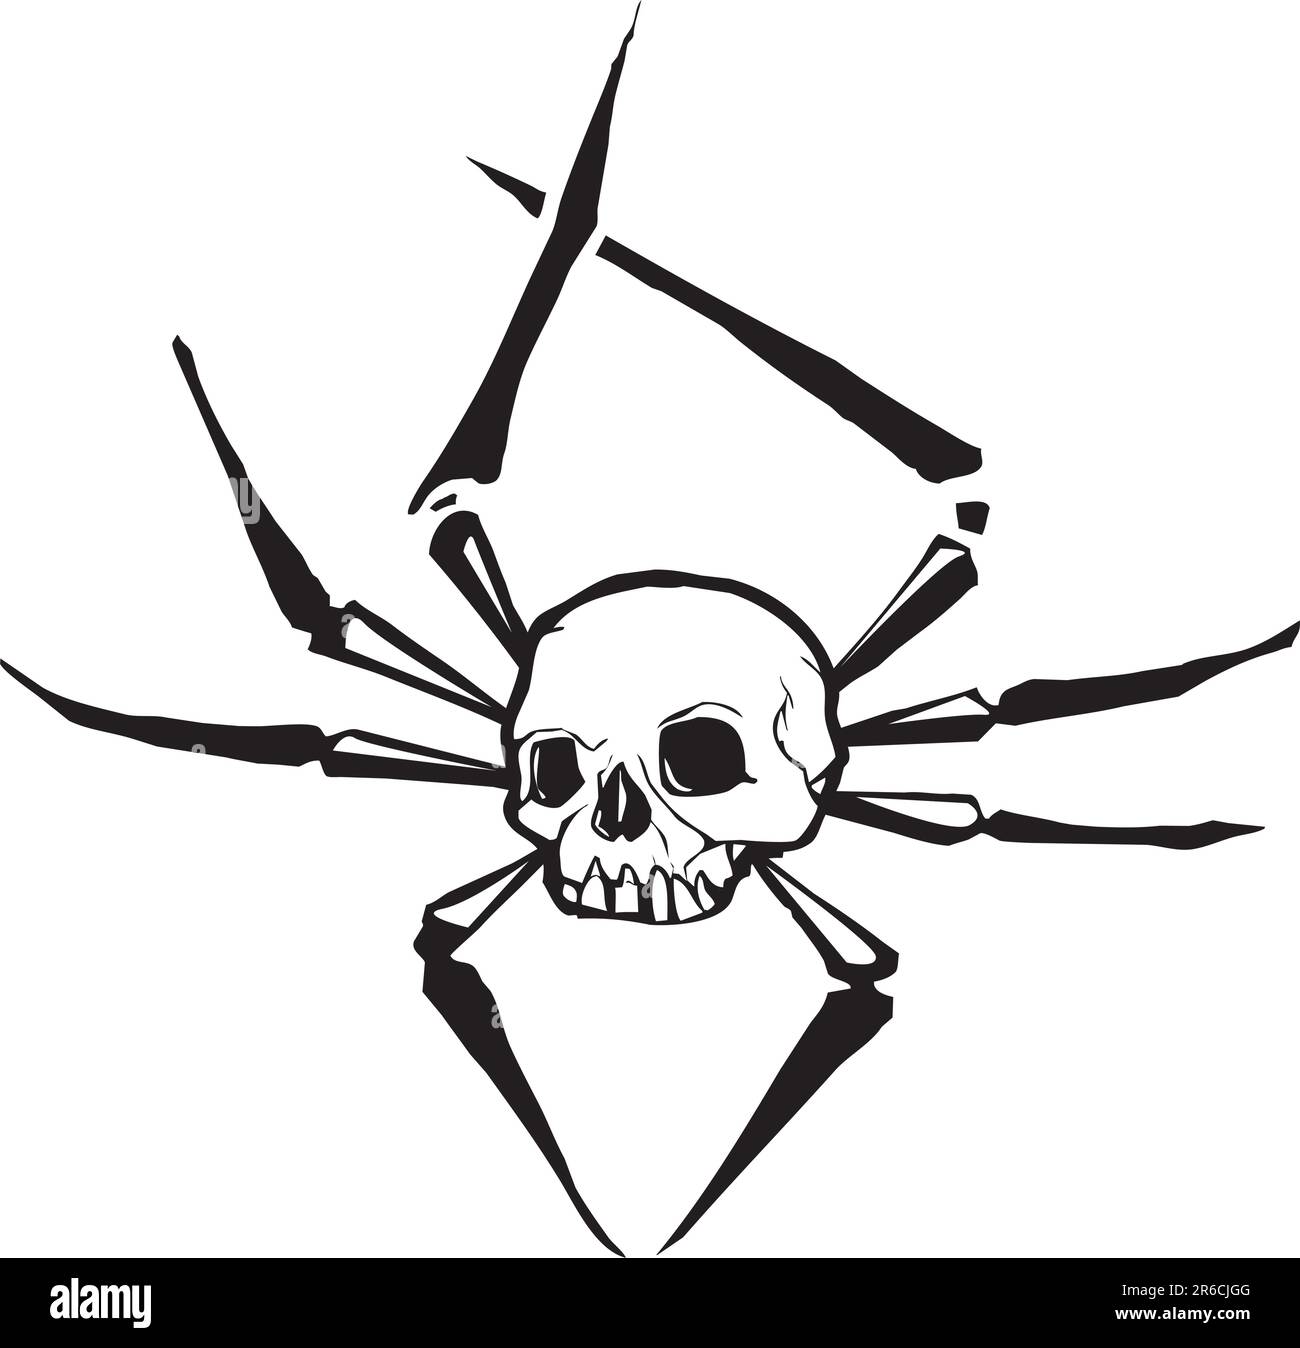 Spider with the body of a human skull. Stock Vector